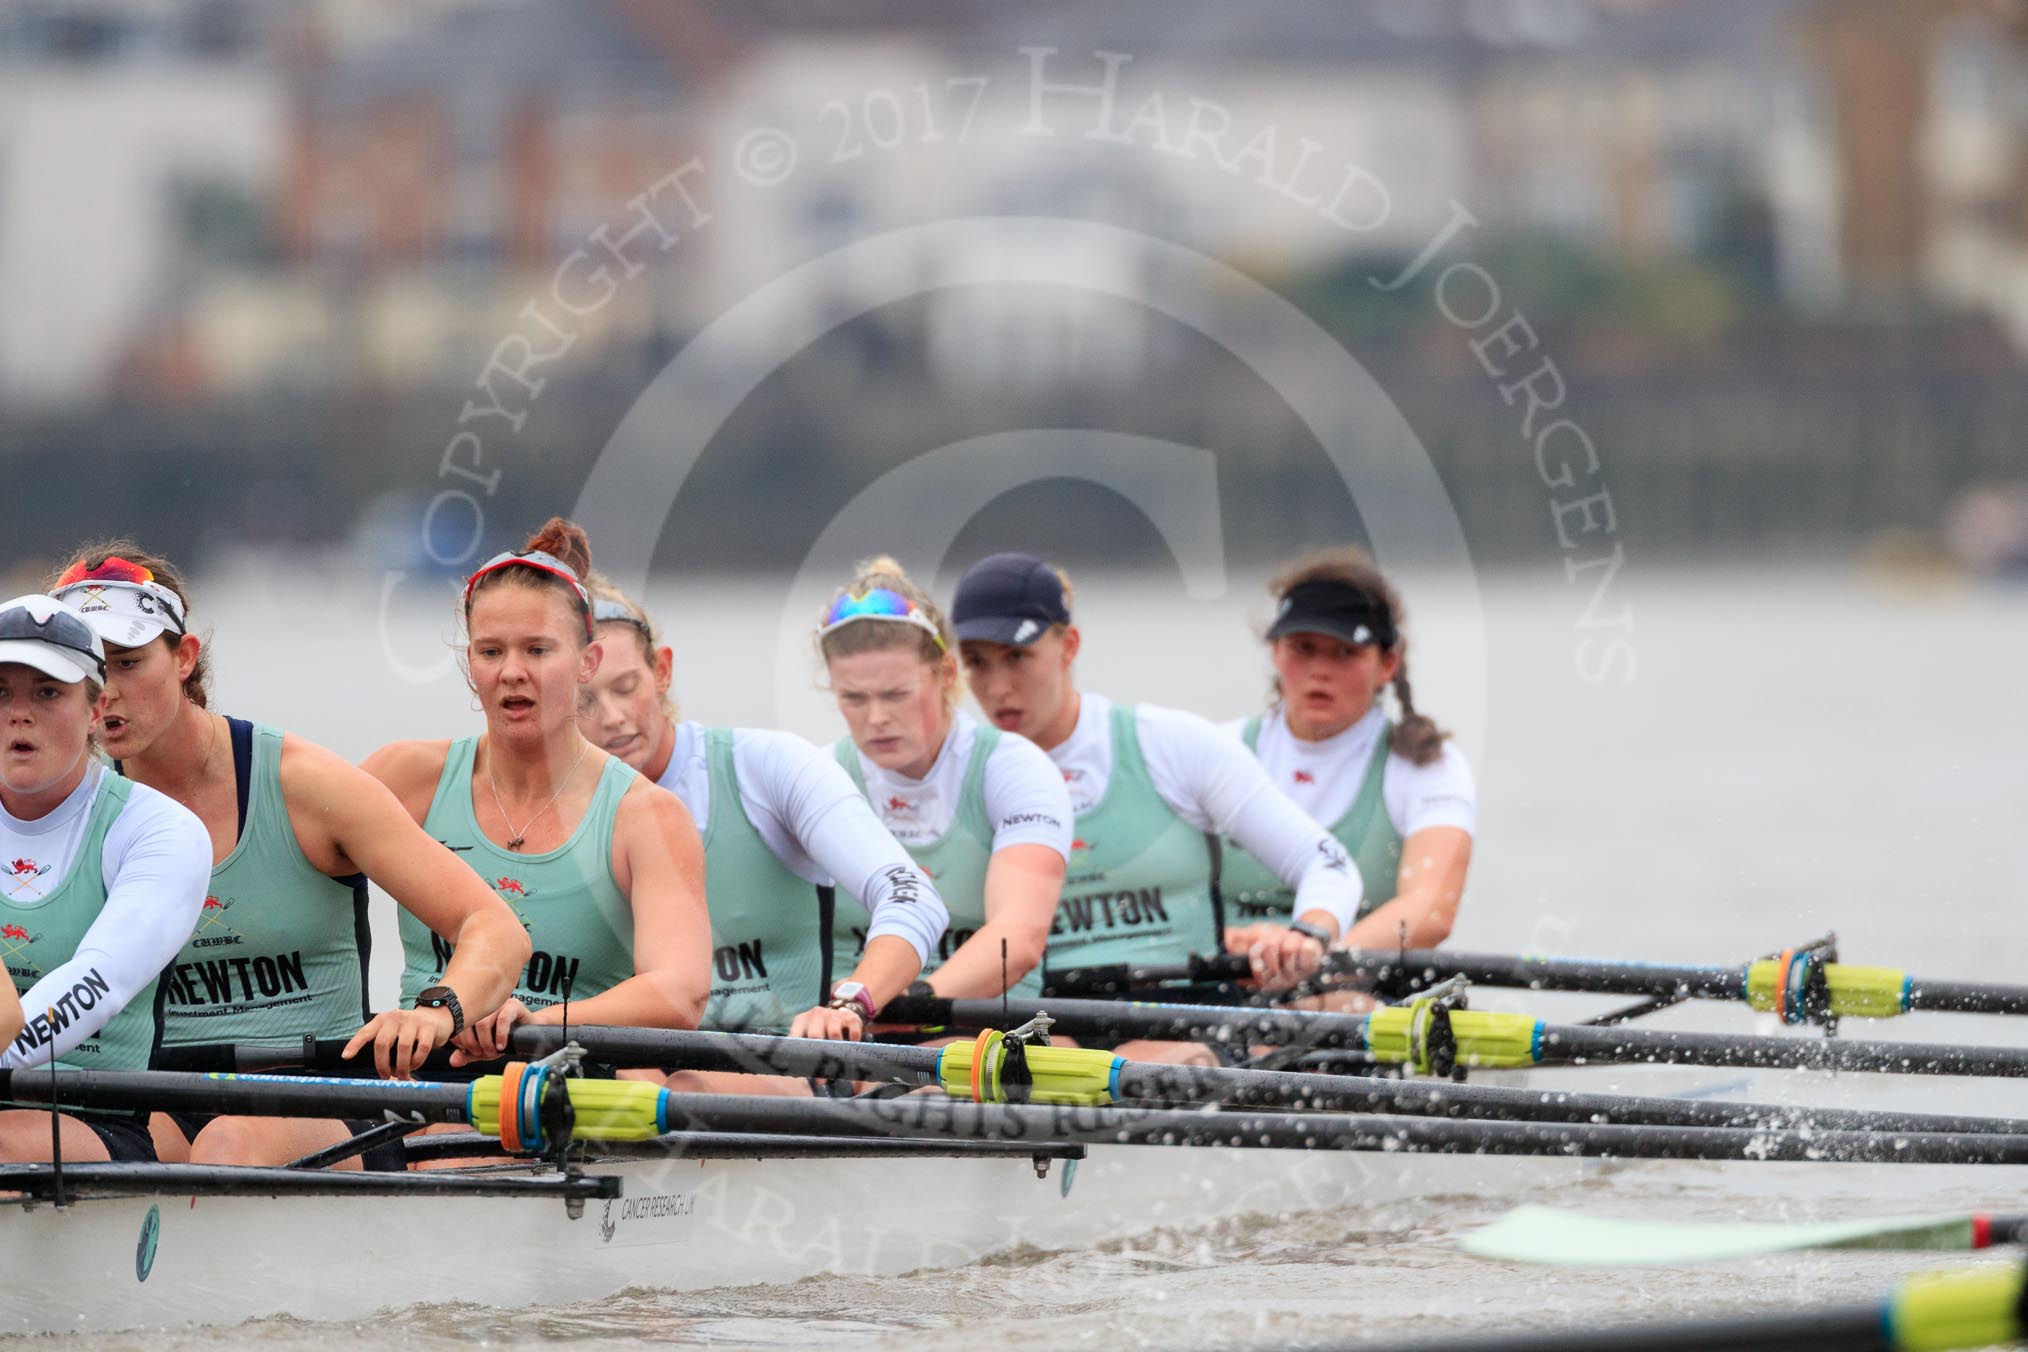 The Boat Race season 2018 - Women's Boat Race Trial Eights (CUWBC, Cambridge): Expecto Patronum , here 7 Abigail Parker, 6 Thea Zabell, 5 Kelsey Barolak, 4 Laura Foster, 3 Sally O Brien, 2 Millie Perrin, bow Eve Caroe.
River Thames between Putney Bridge and Mortlake,
London SW15,

United Kingdom,
on 05 December 2017 at 12:52, image #125